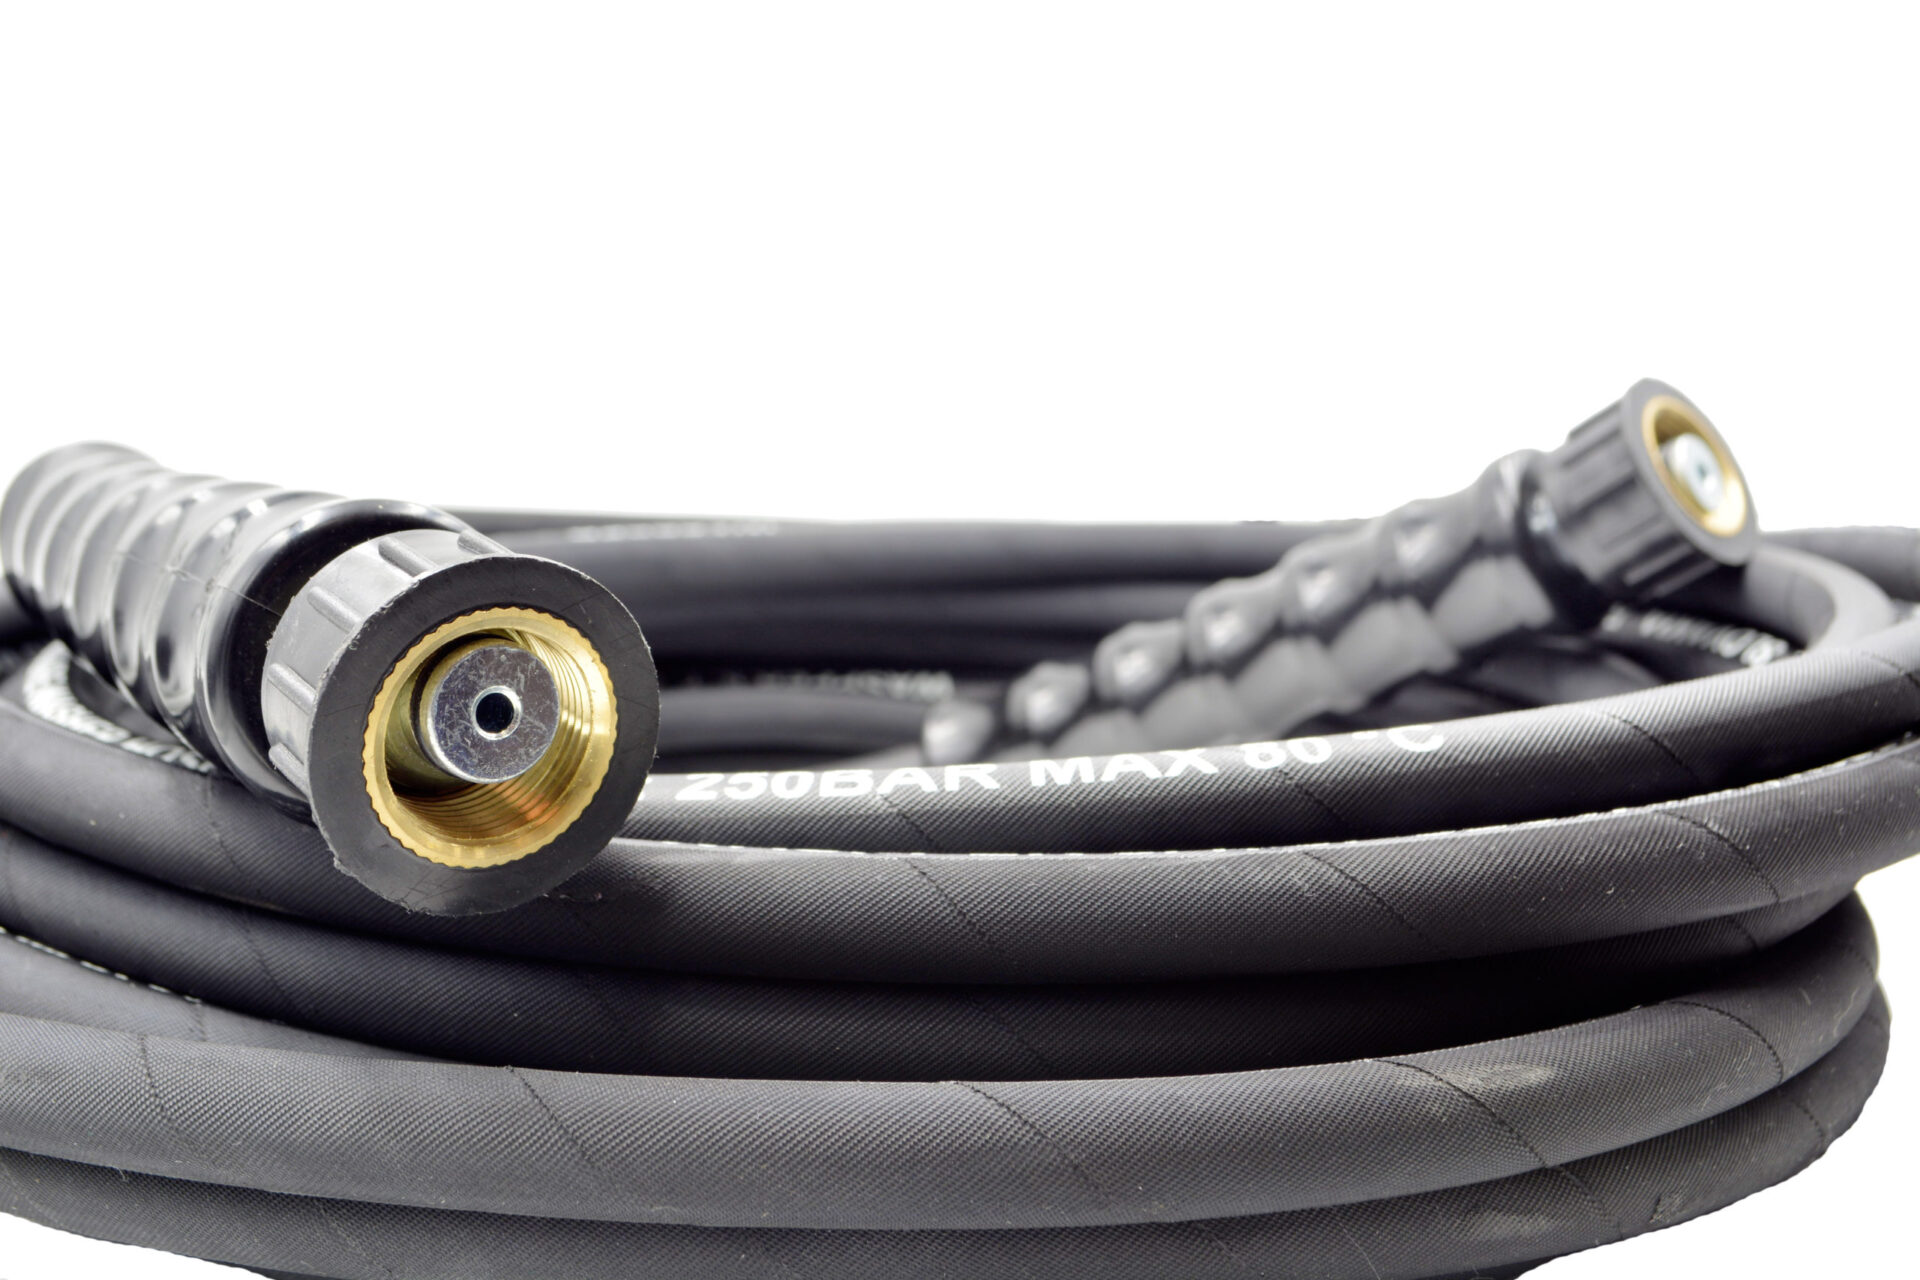 Need New Hoses for Your Washing Machine. Find Quality Parts Locally or Online With This Guide